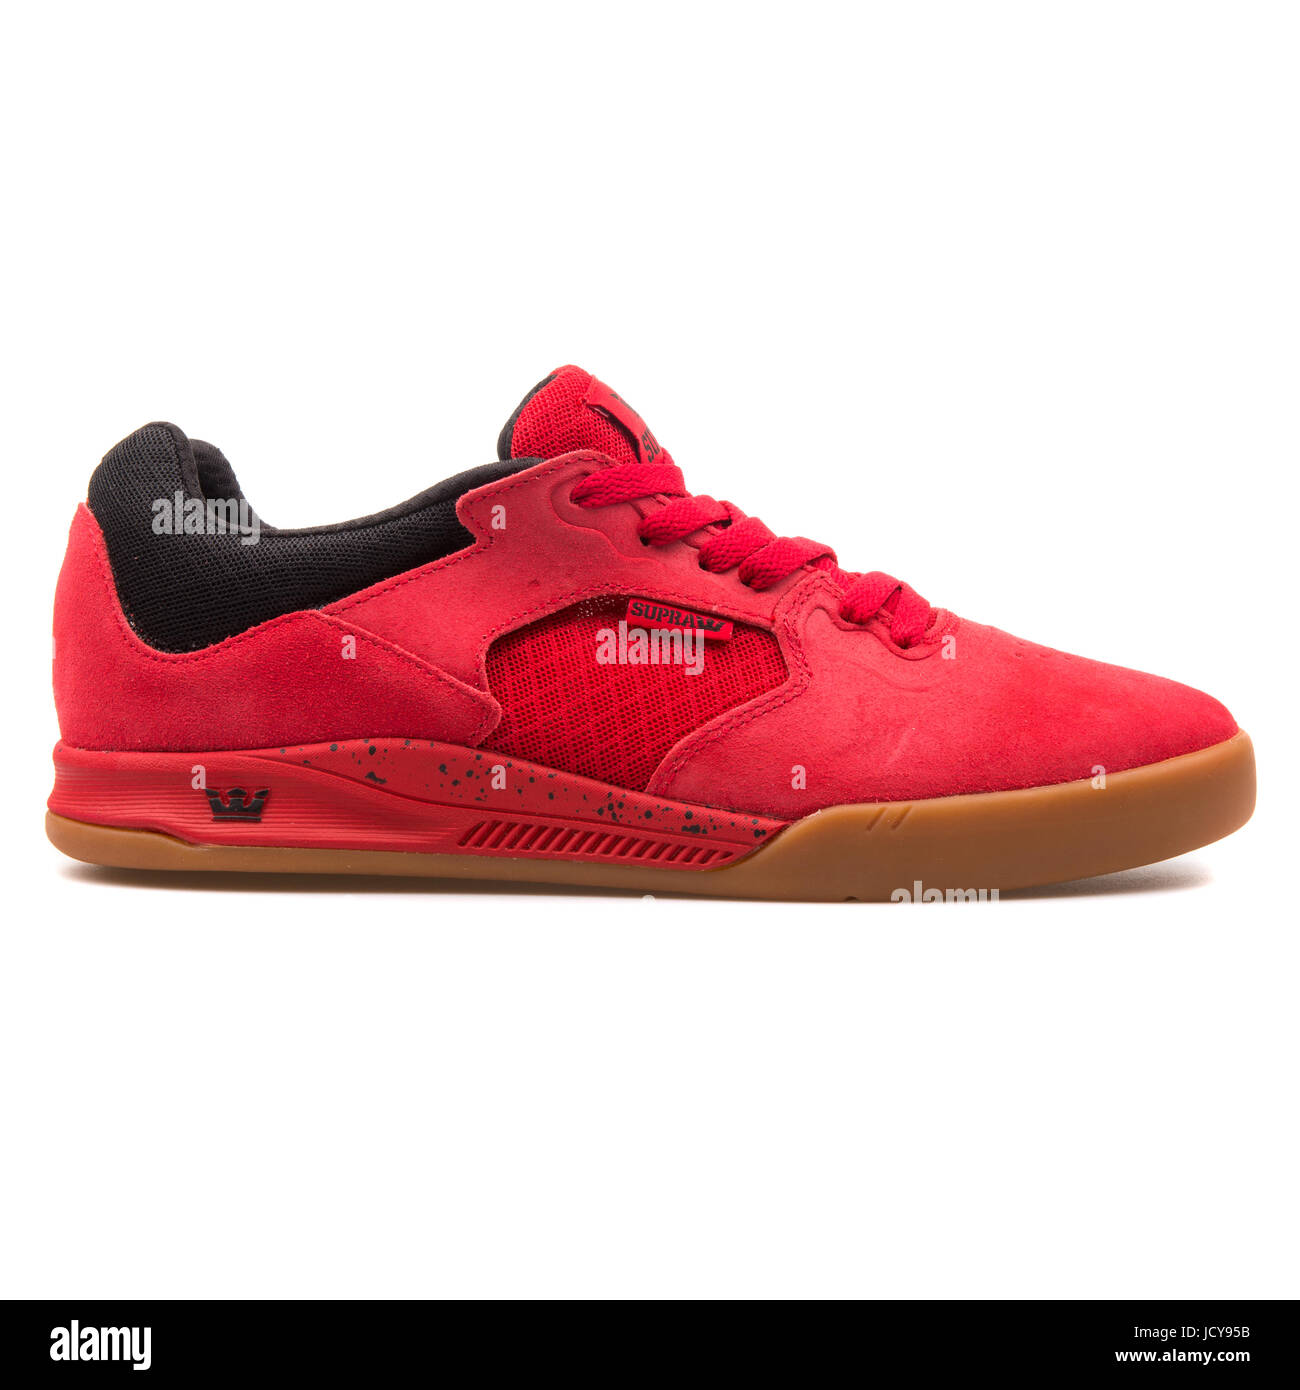 Supra Avex Red and Black Men's Sports Shoes - S22010 Stock Photo - Alamy